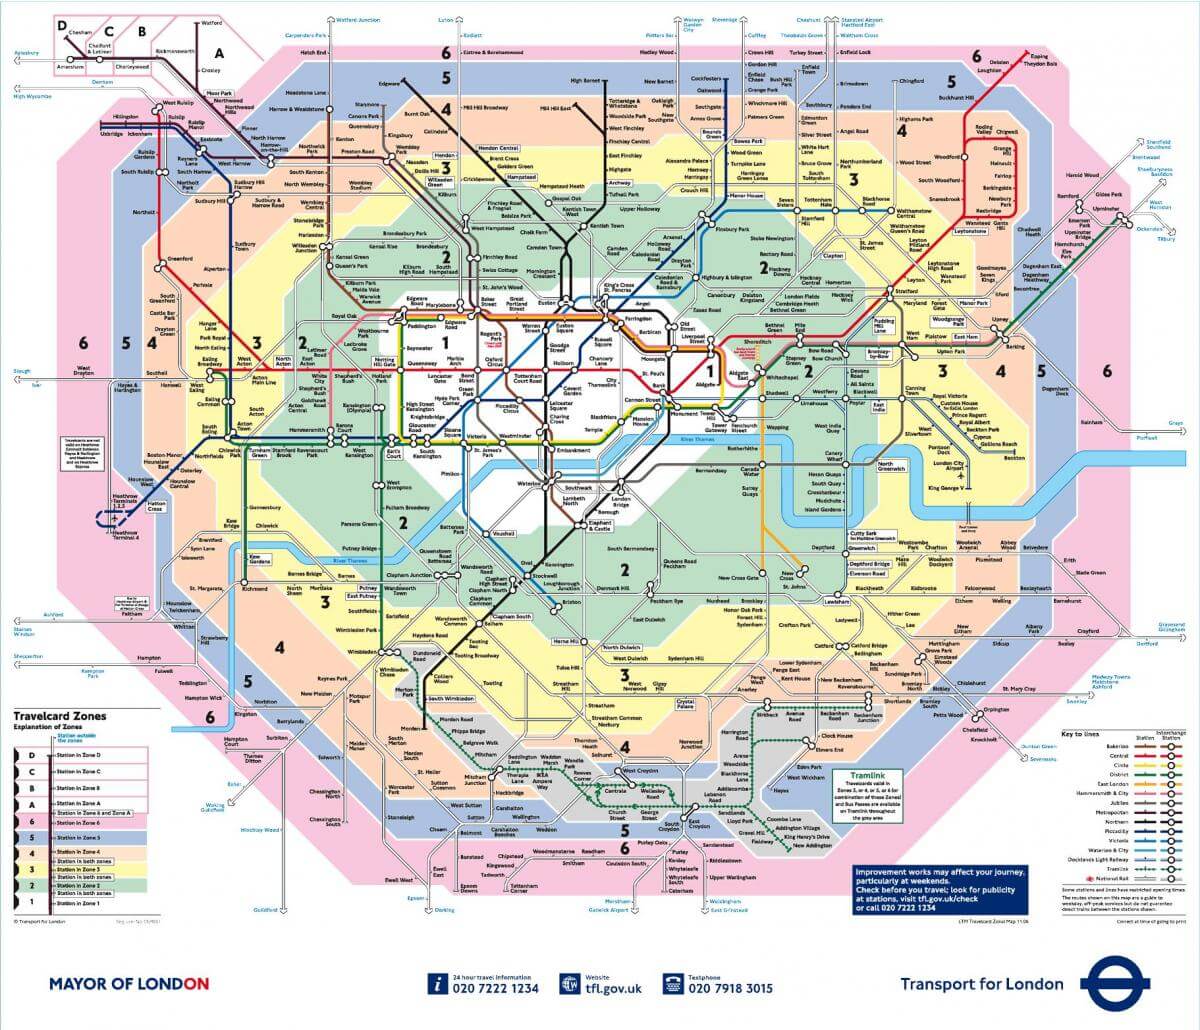 A map of the TFL train lines in London, with coloured overlays showing the different travelcard zones.